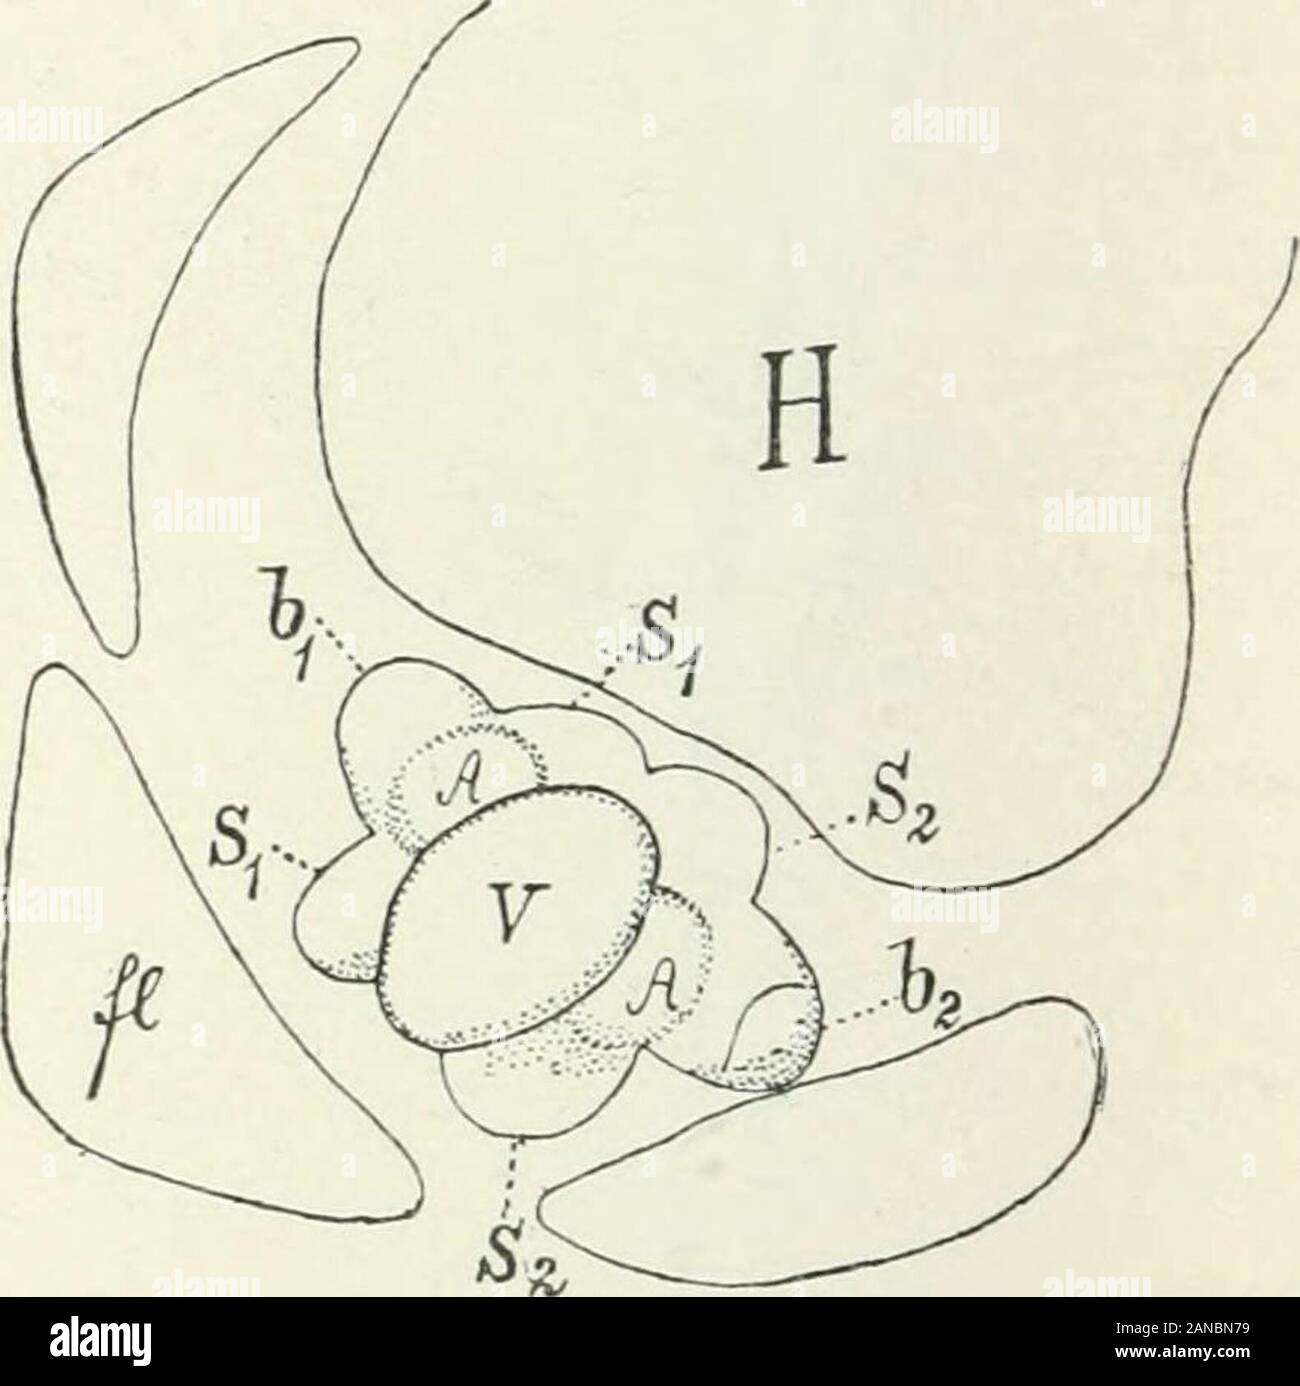 Organography of plants, especially of the archegoniatae and spermaphyta . Fig. 243. Cinchona succirubra.Terminal bud enclosed by the mussel-like interpetiolar stipules of the pairof leaves of which the stalks only areshown. Fig. 244. Galium Mollugo. Axis of the shoot Hin transverse section;  /?, axillant leaf of a bud, whichhas laid down the first leaf-prlmordia of a whorl ;V, vegetative point of the axiallry bud ; bu bn, the firstleaves with stipules il.Si, .S2.S2; -4, ^, axillary shootsof these leaves. The stipules are less developed uponthe side next the axis. leaves of a whorl arise at the Stock Photo